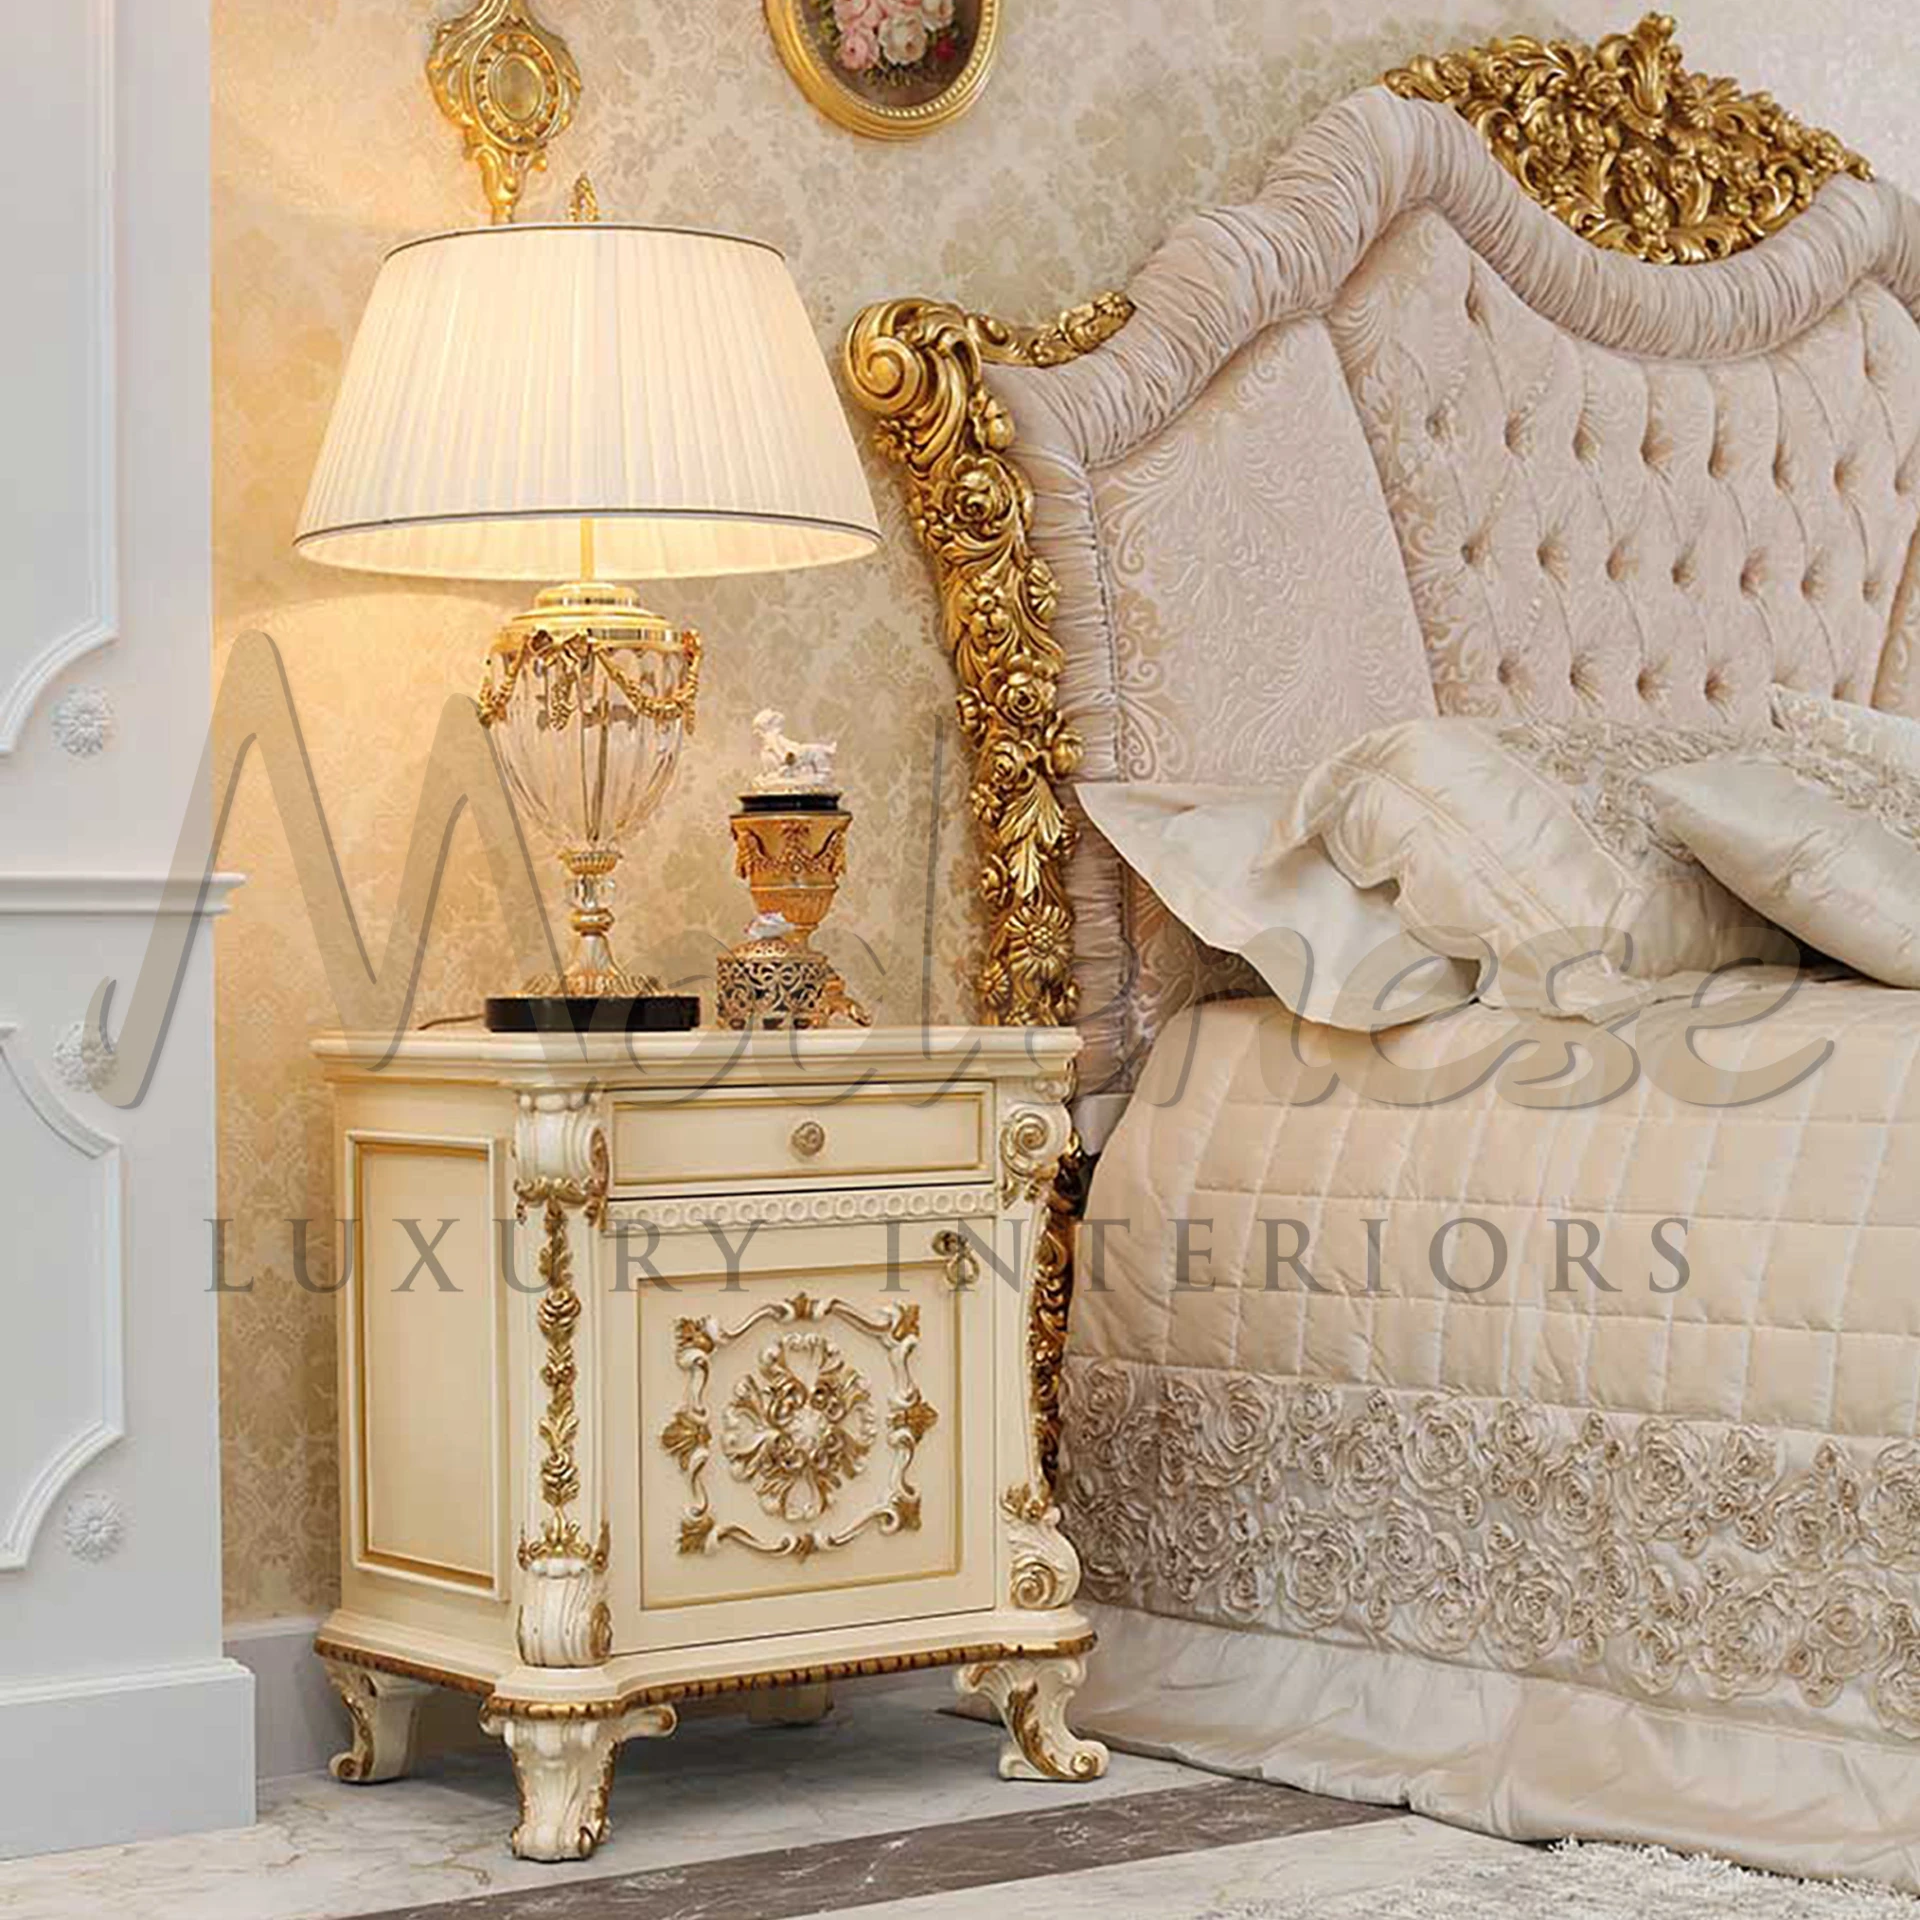 A baroque cream and gold nightstand with decorative carvings and a lamp, adjacent to an ornate tufted headboard handmade by Modenese Furniture Manufacturer.